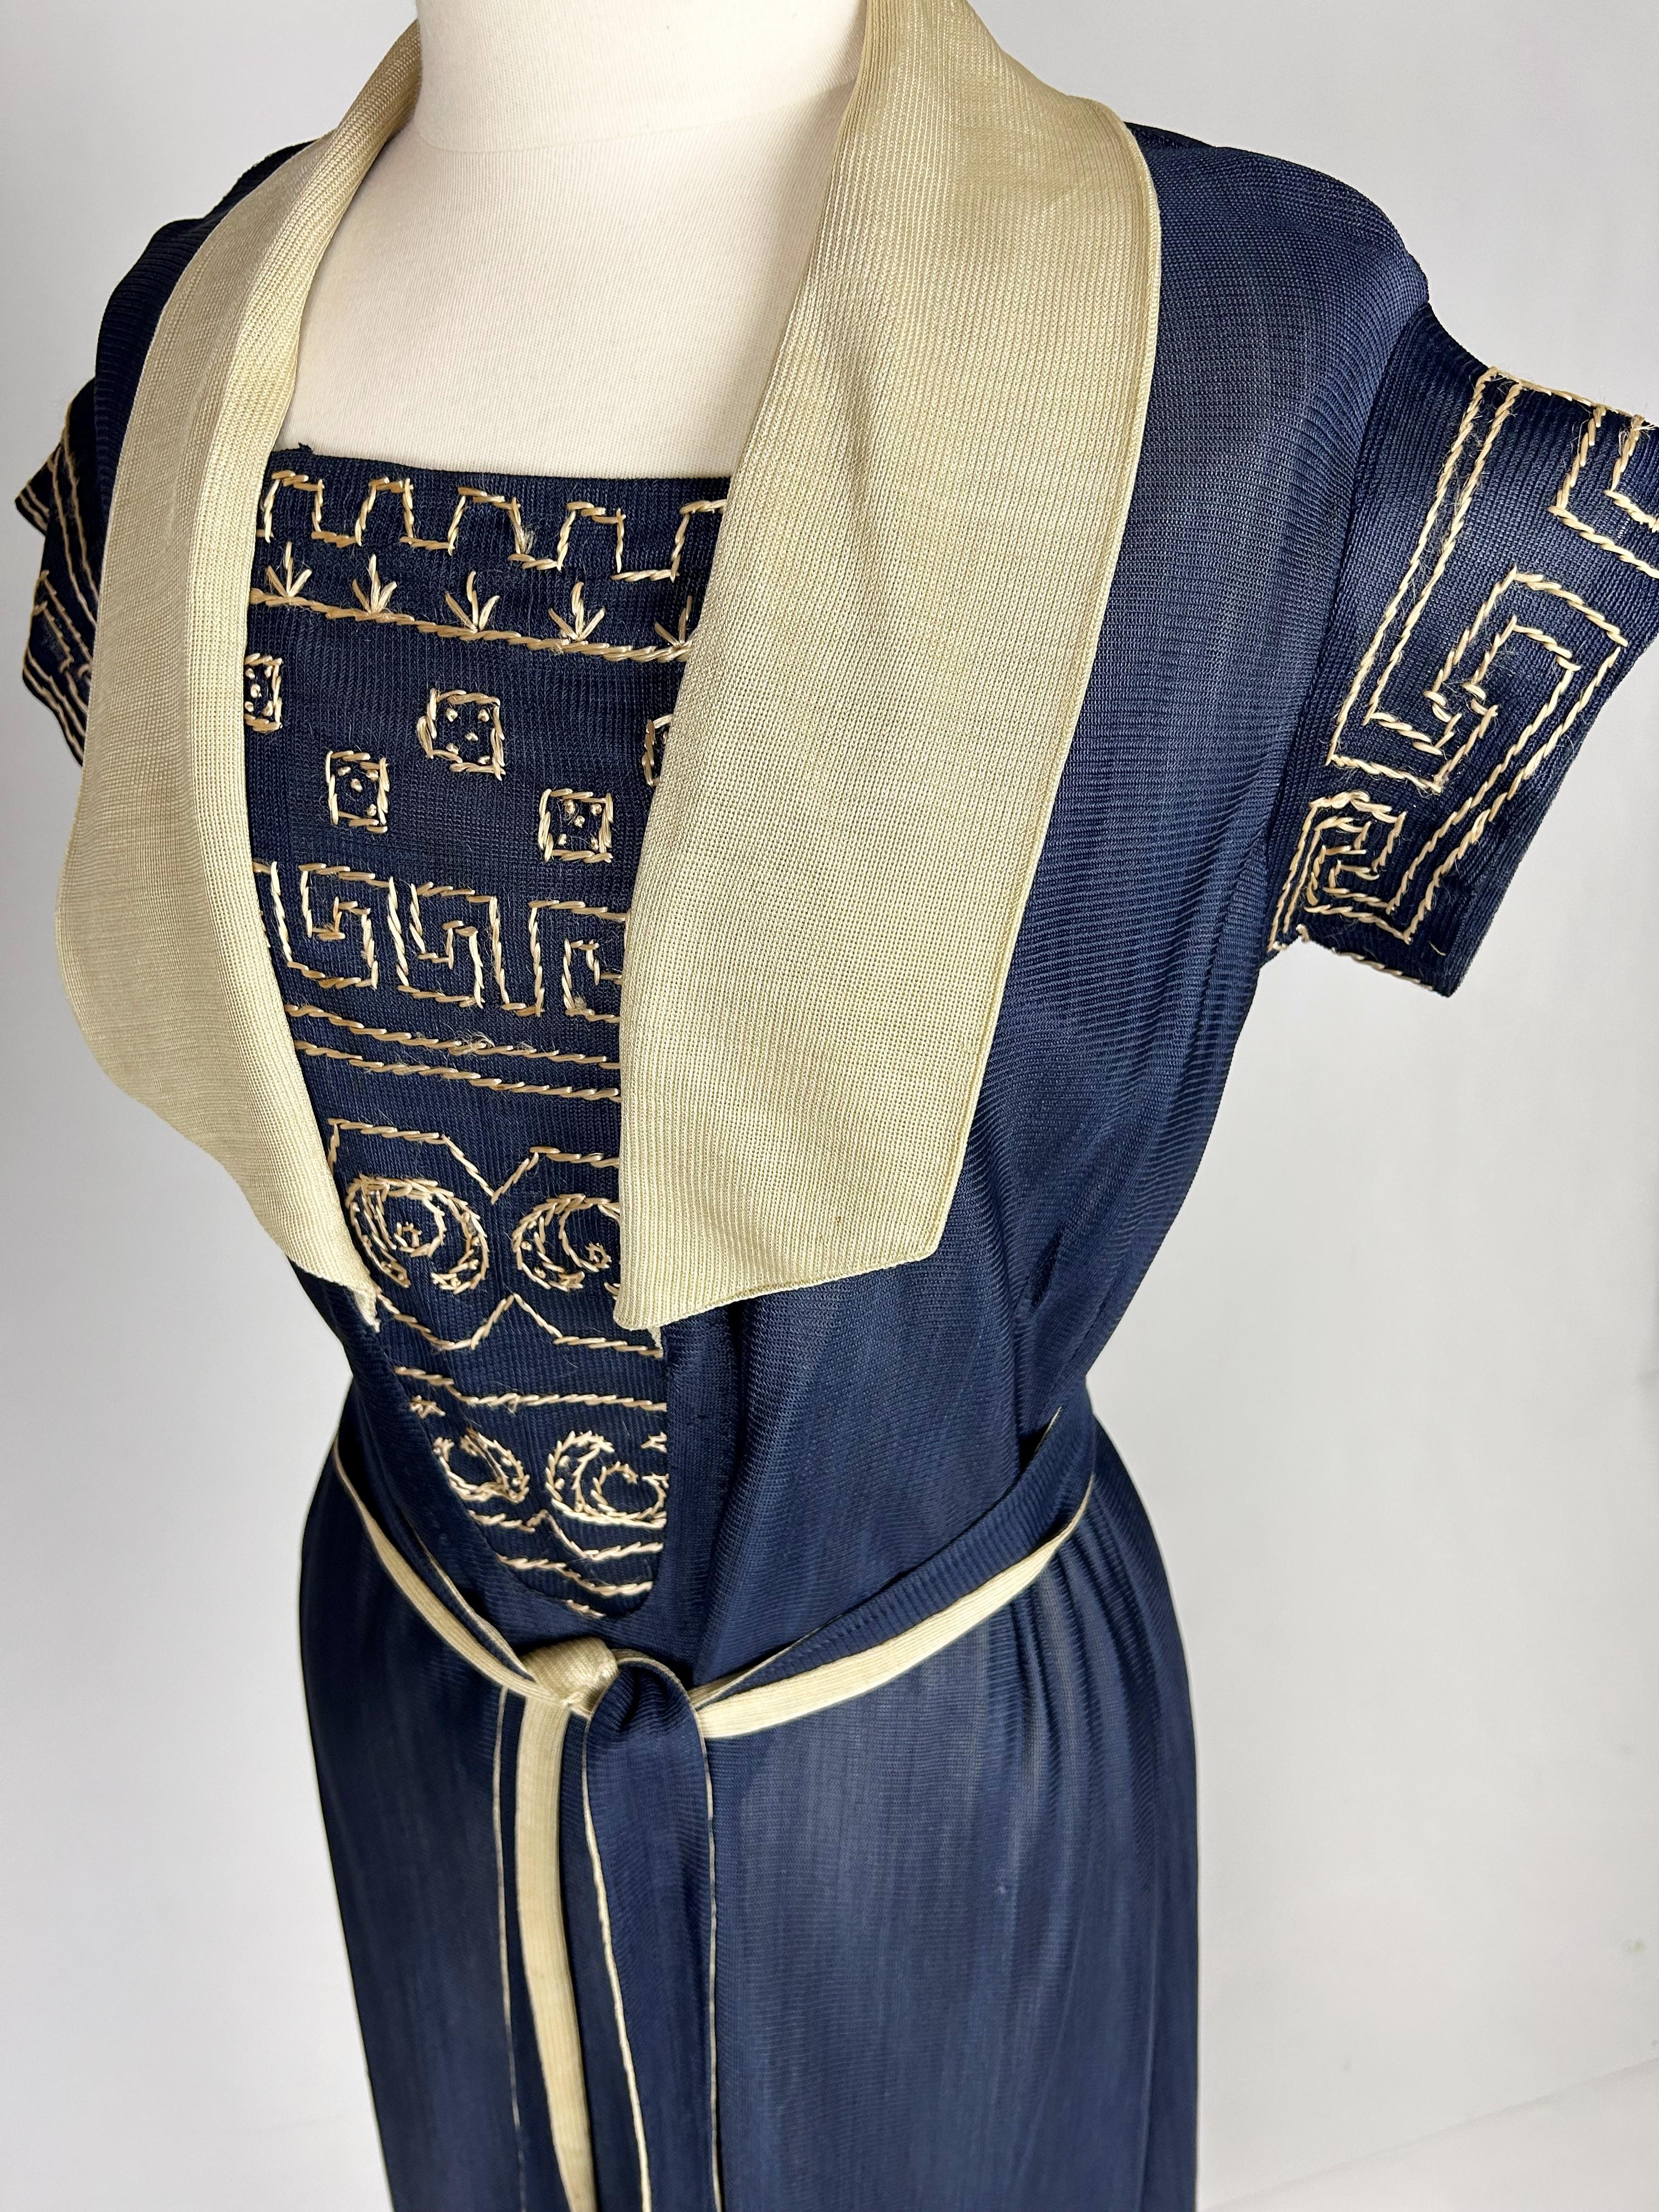 CC embroidered jersey knit silk Dress in the style of Coco Chanel France C. 1920 For Sale 6